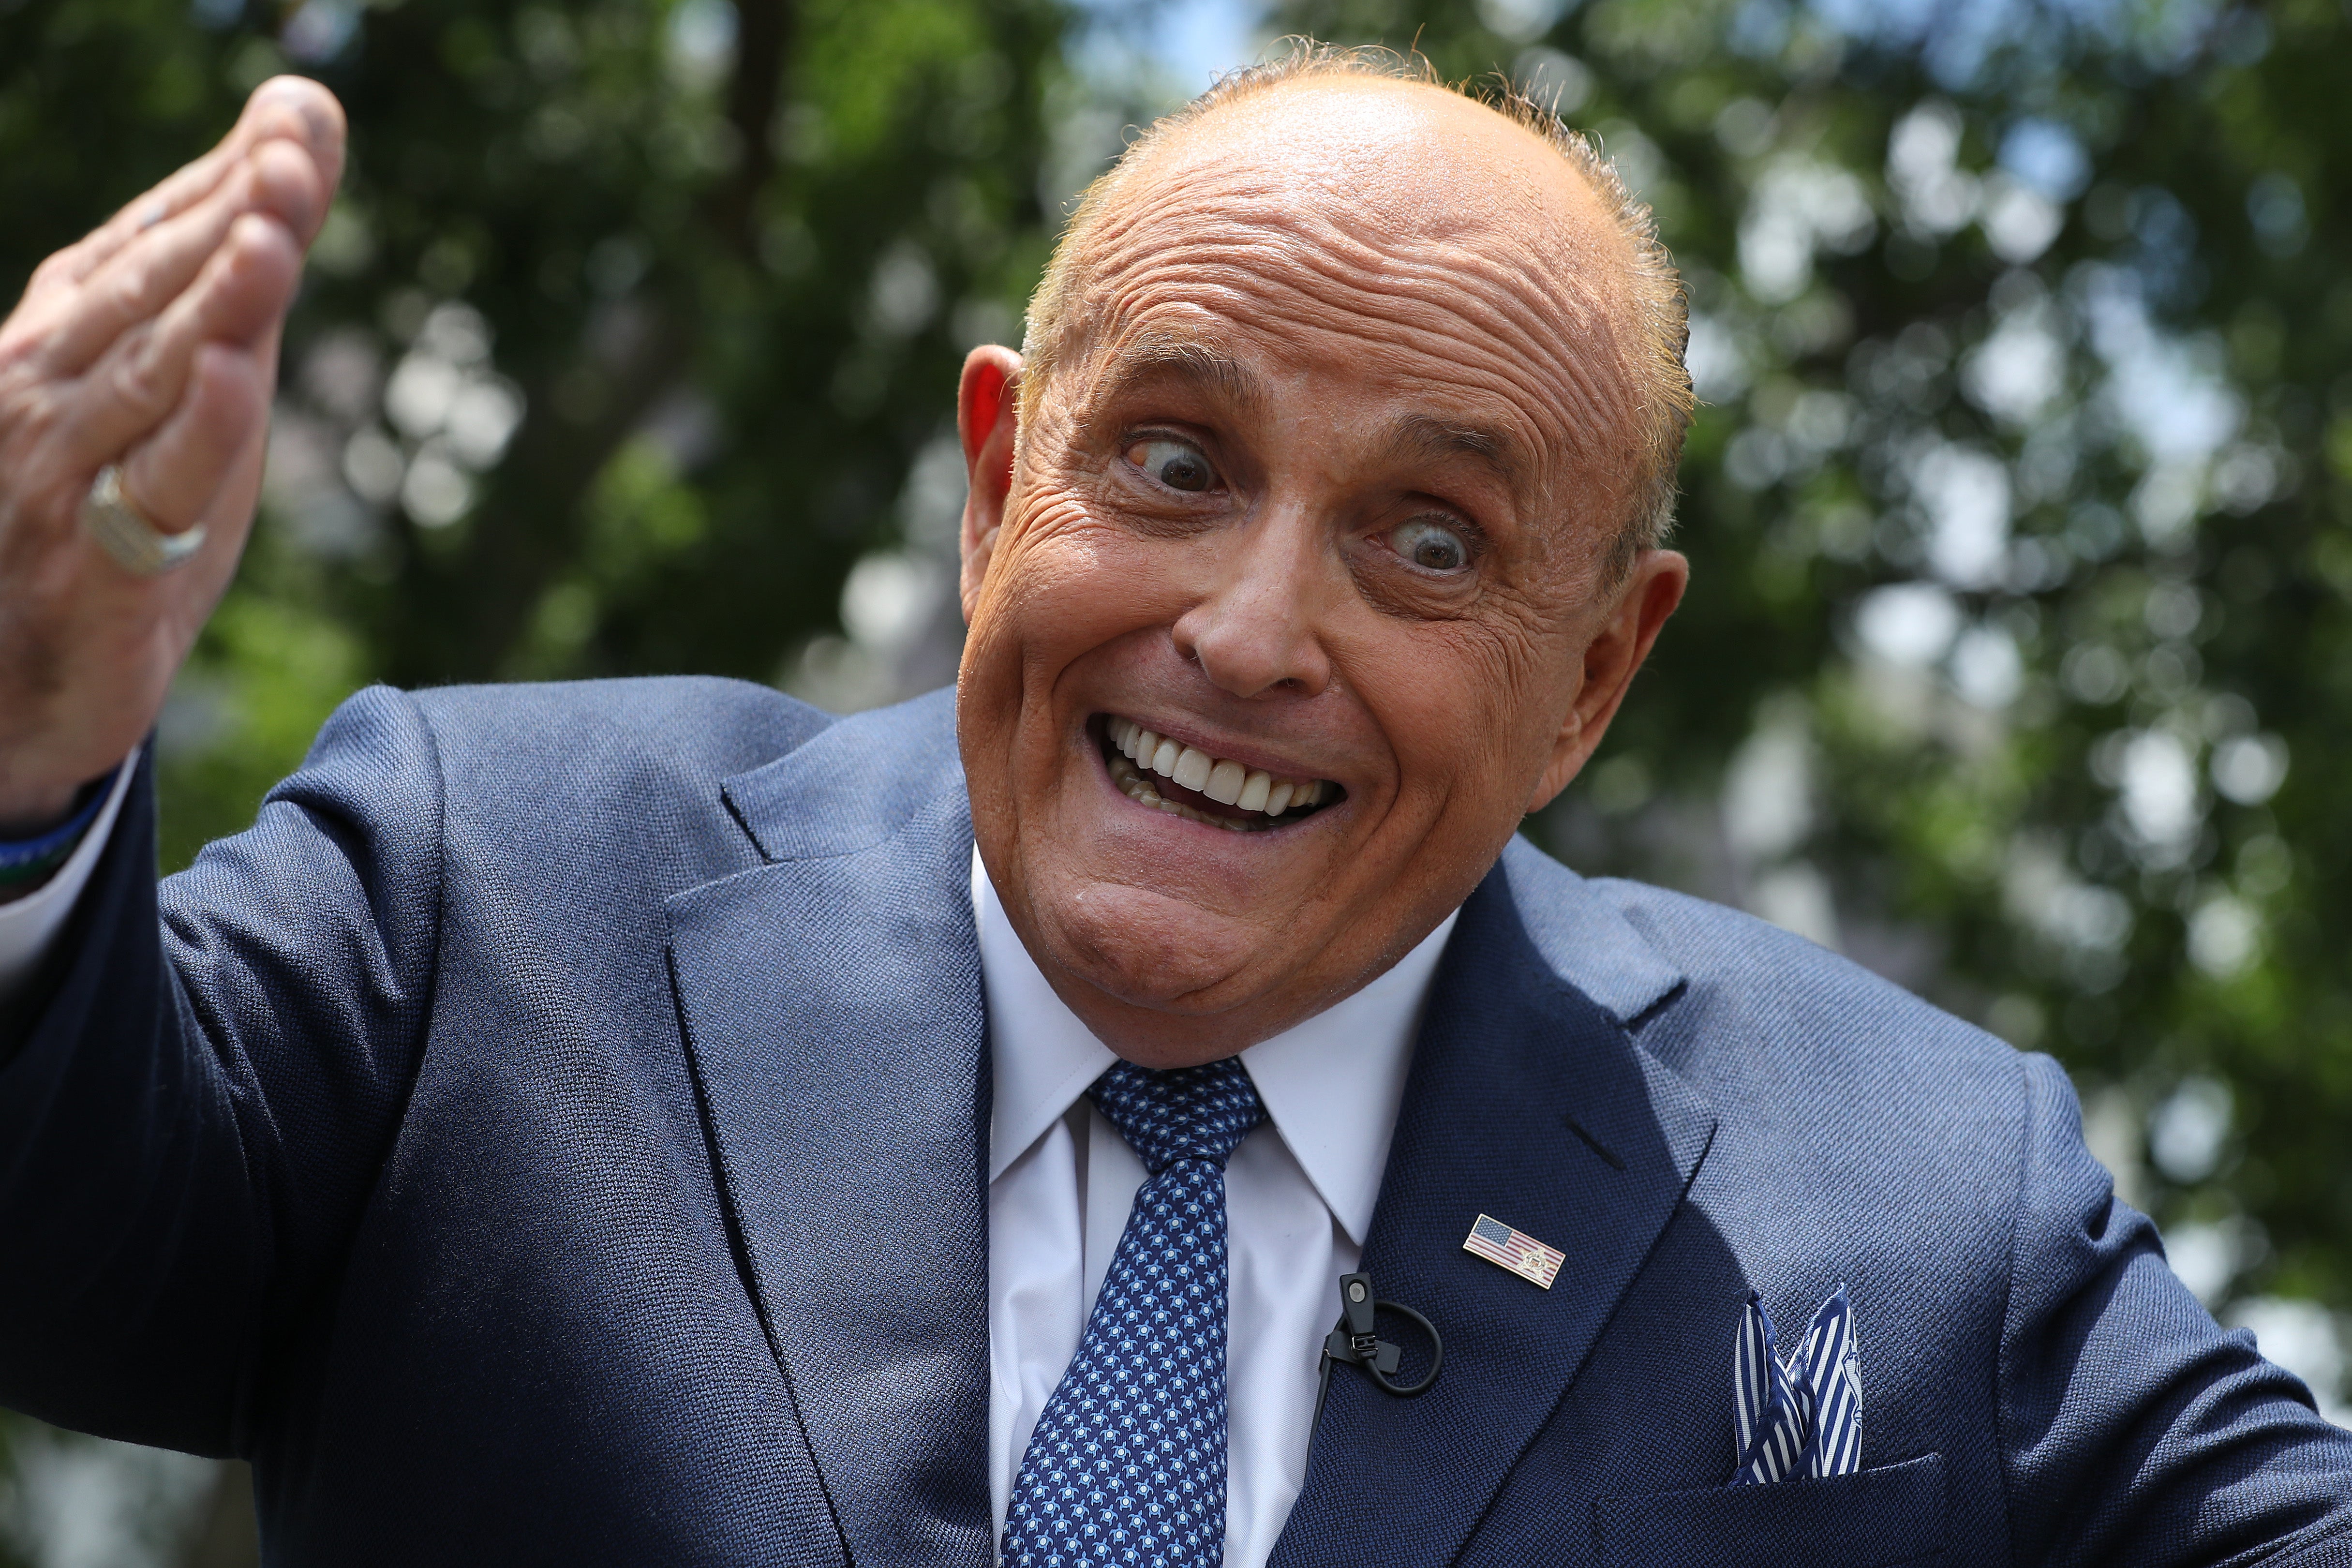 Rudy Giuliani talks to journalists outside the White House West Wing on 1 July 2020 in Washington, DC